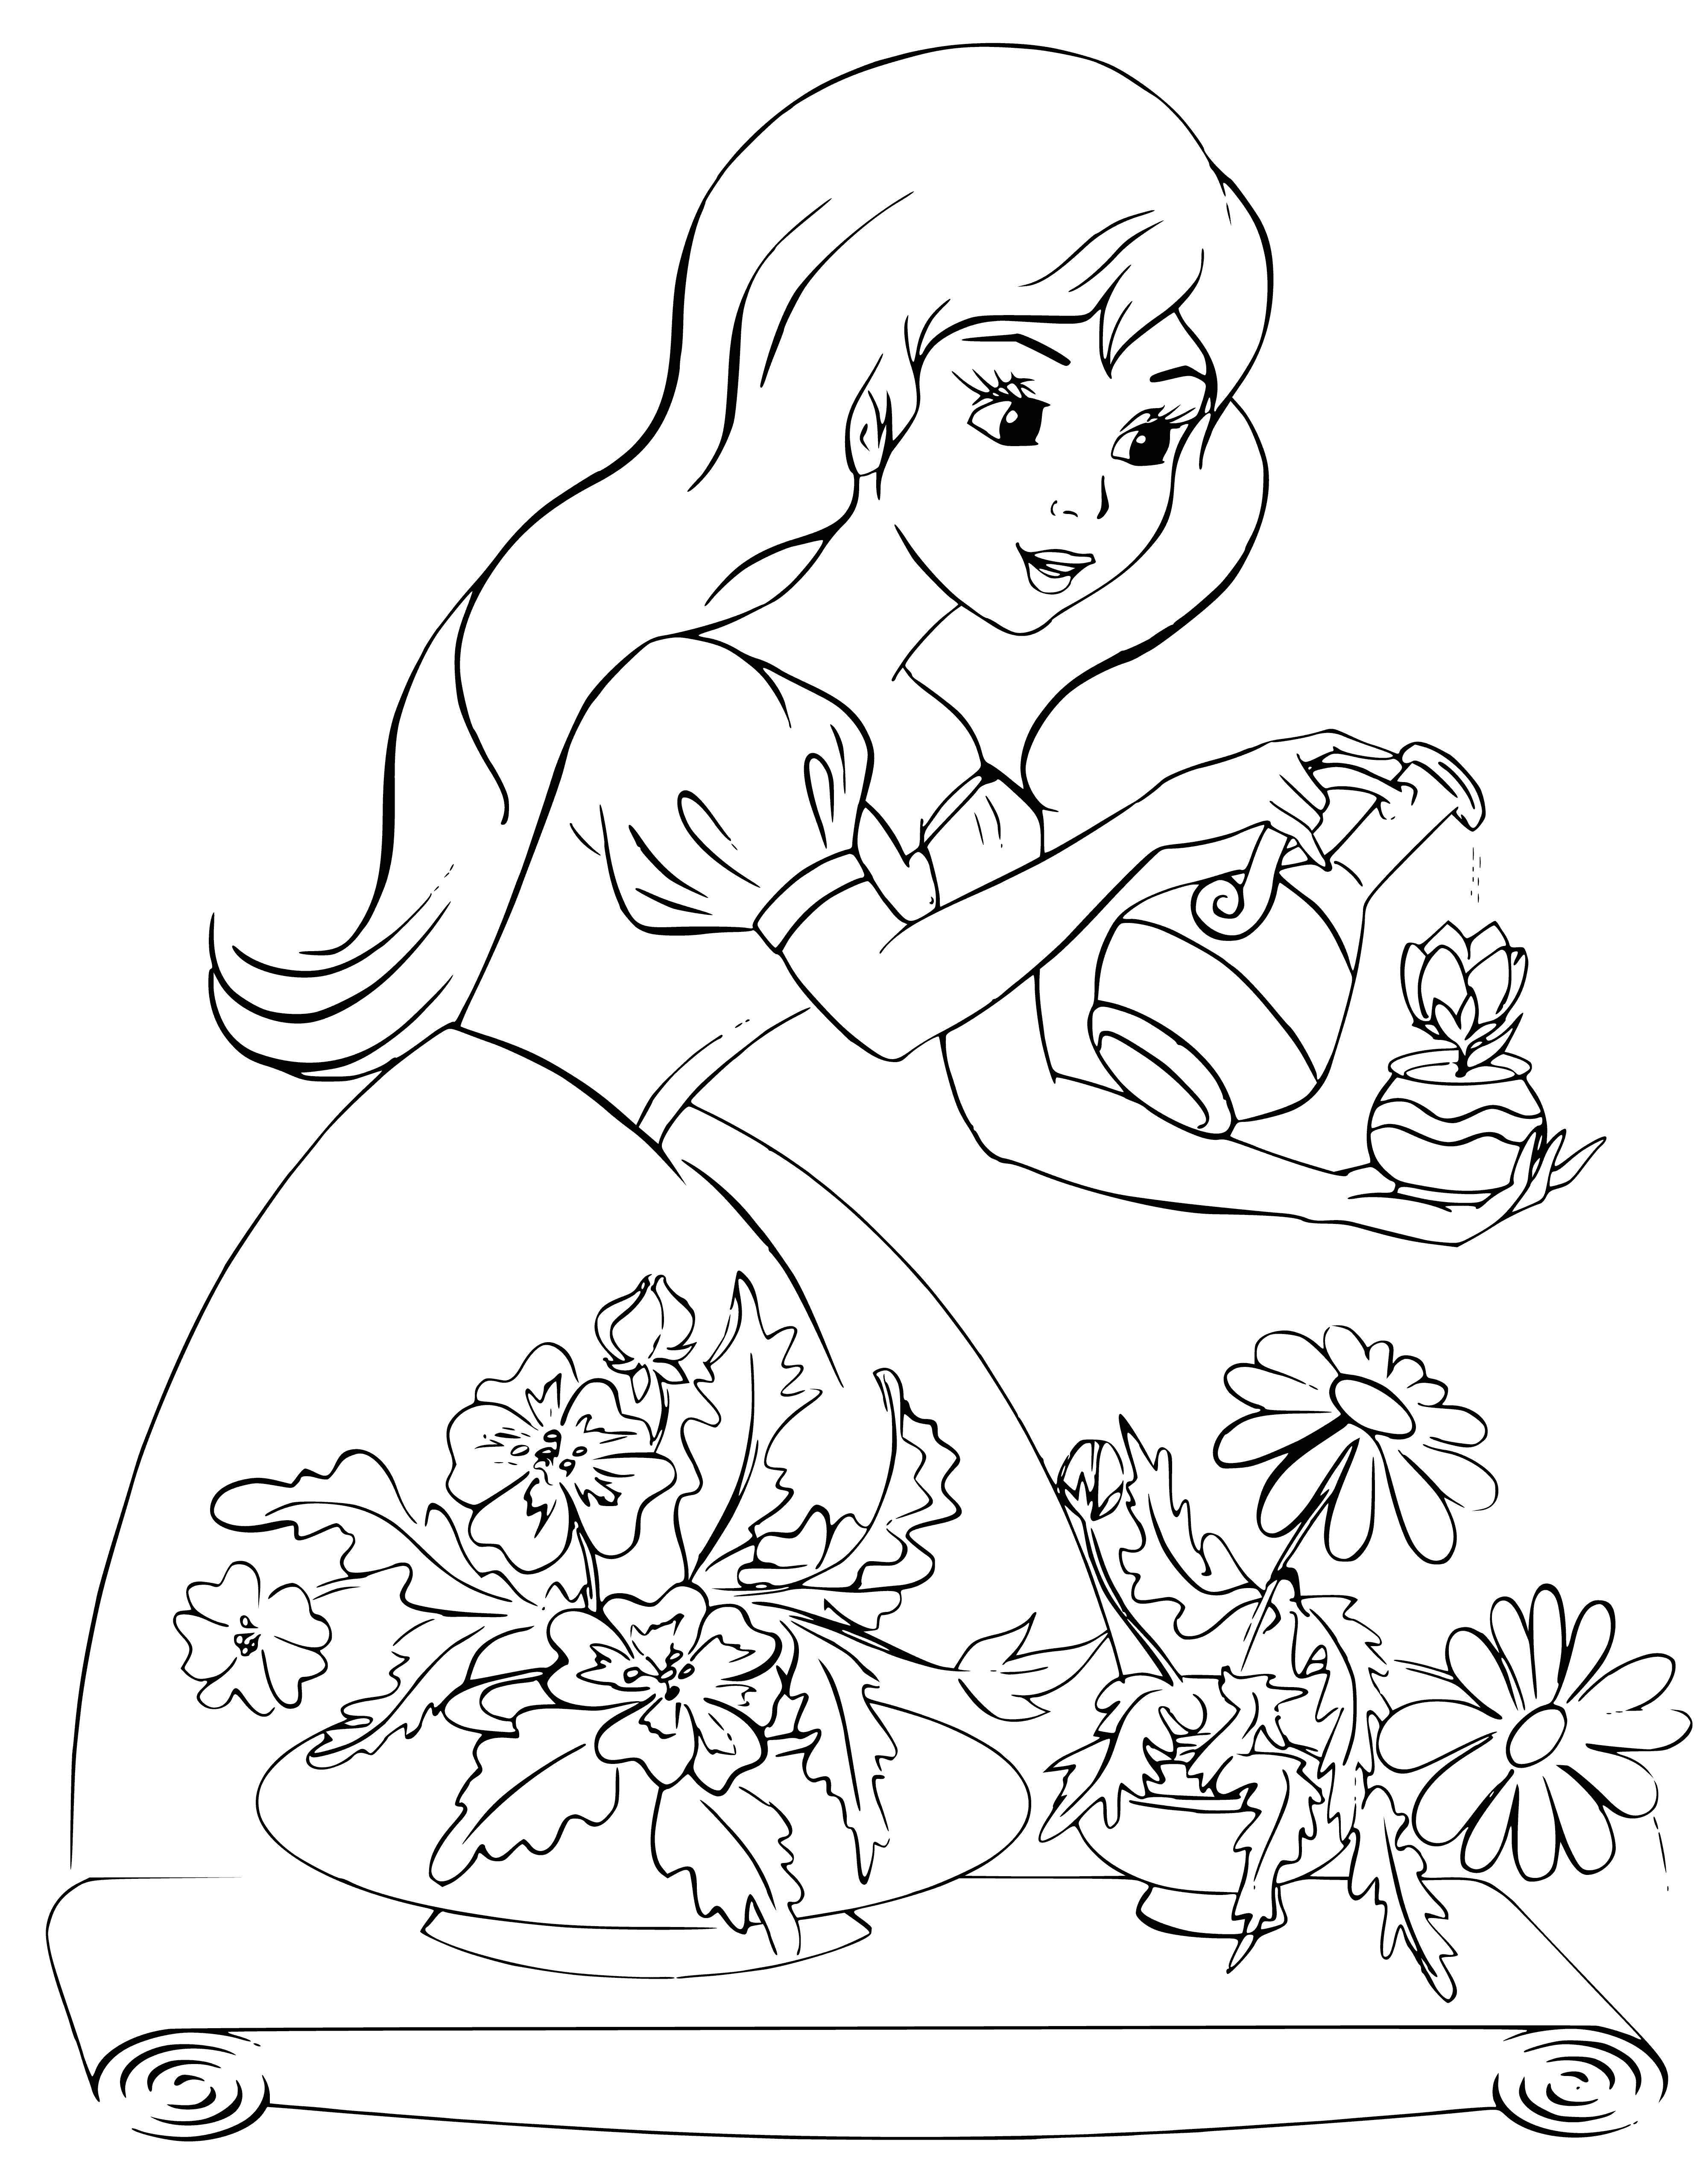 Princess watering flowers coloring page